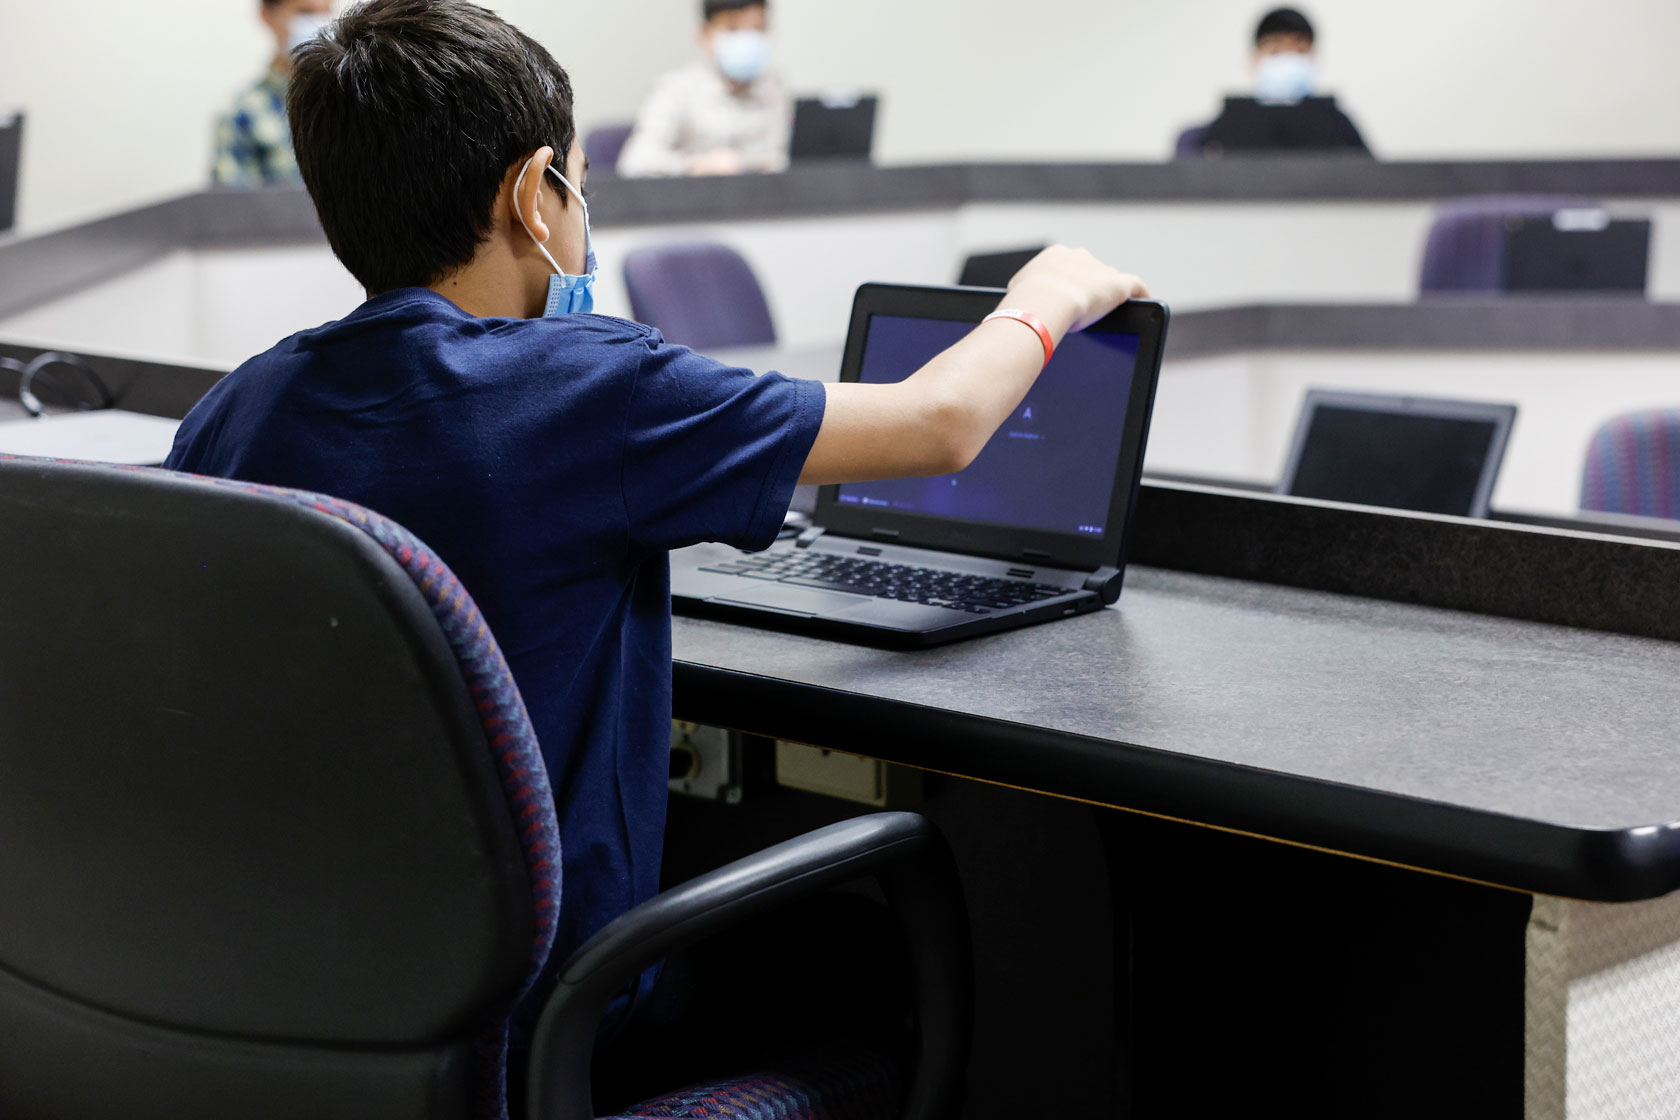 A boy opens his laptop in a computer classroom.